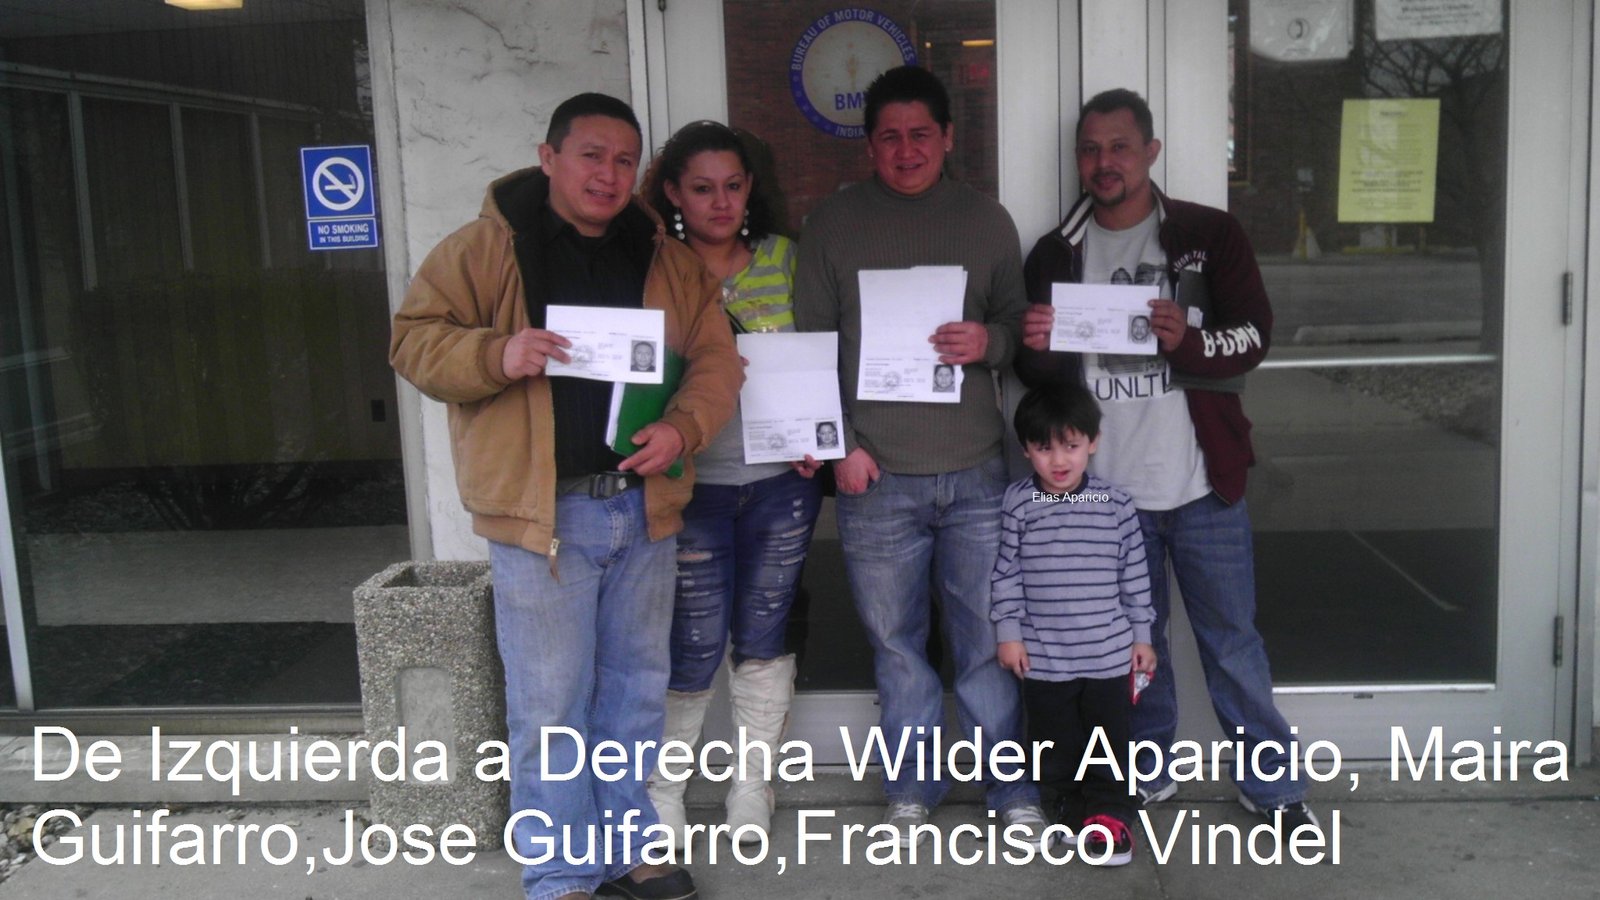 Wilder Aparicio and TPS group driving license Indiana